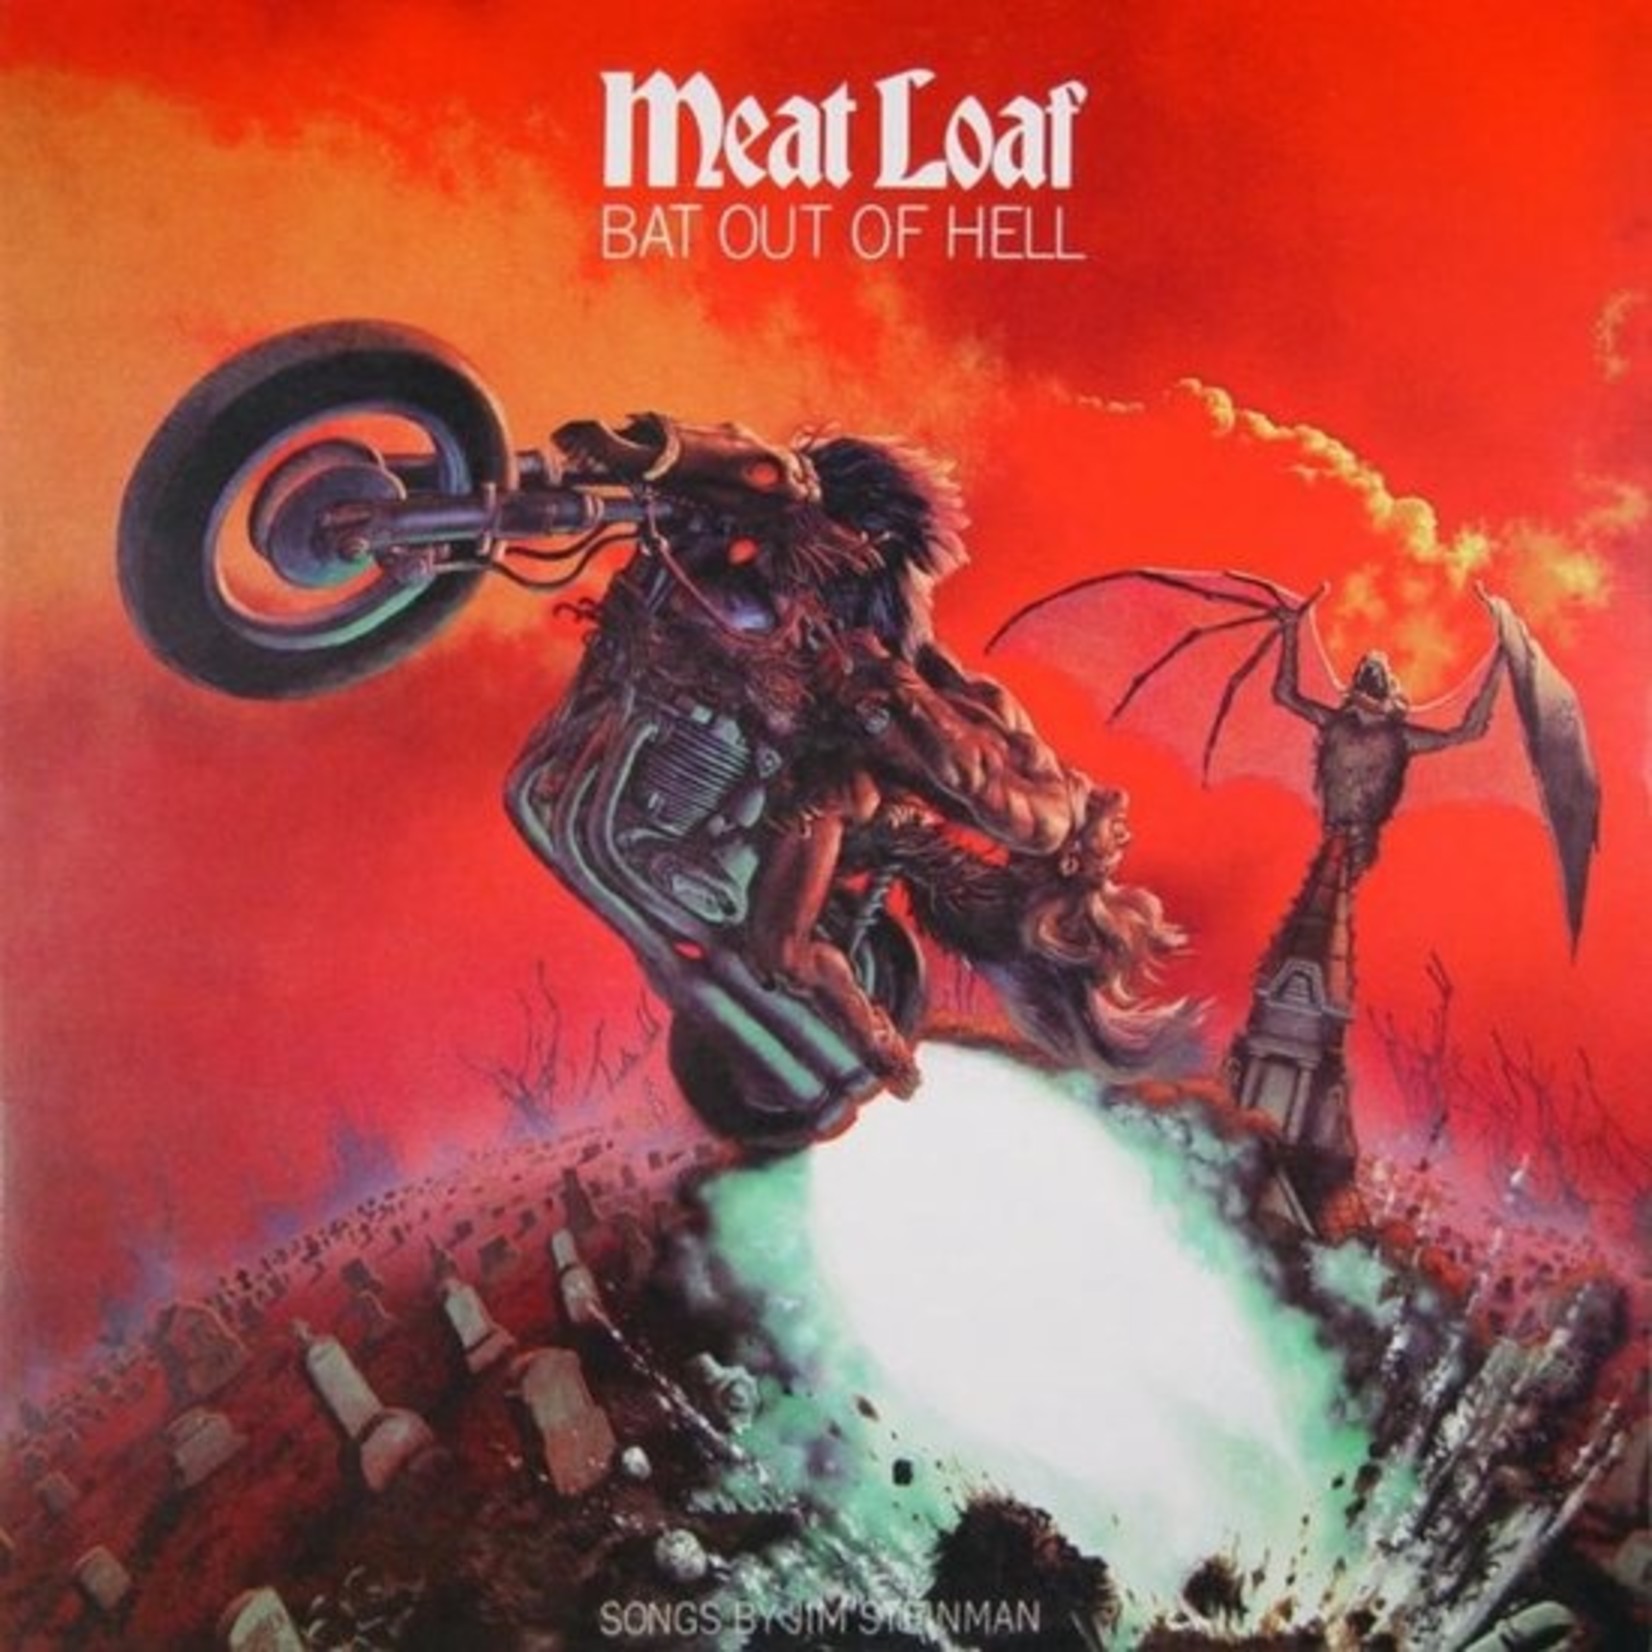 MEAT LOAF - bat out of hell LP